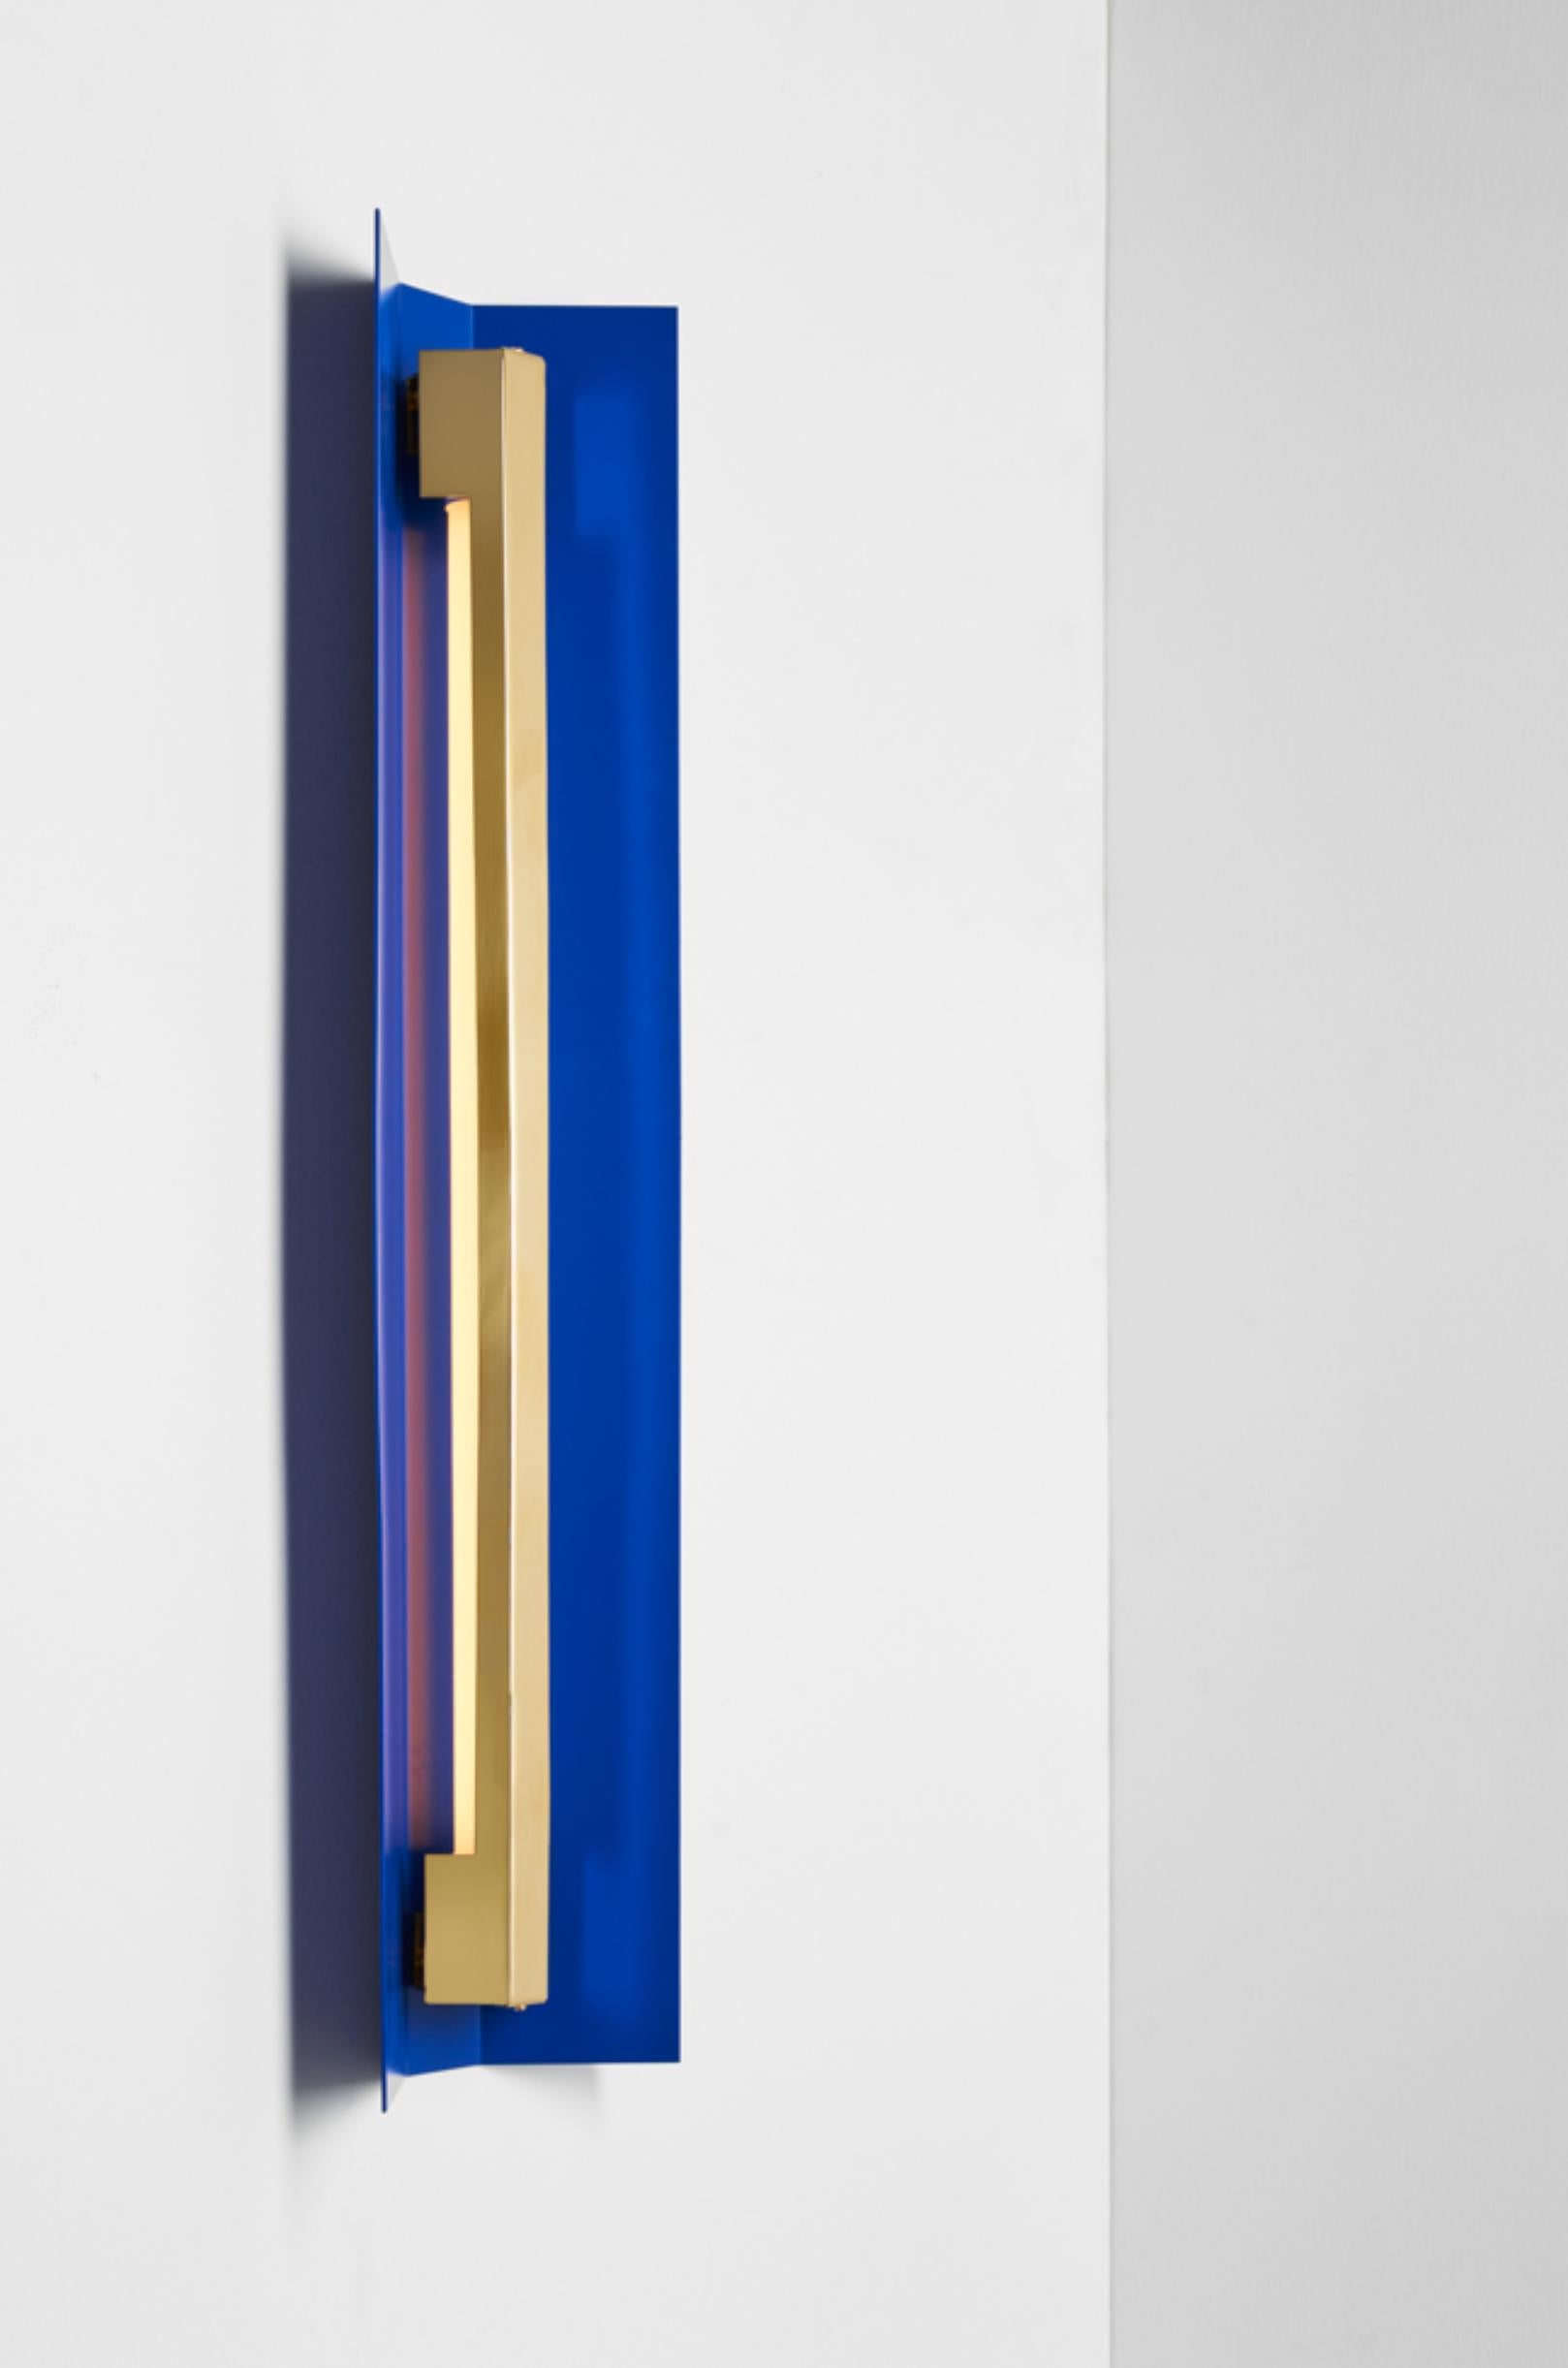 Small Misalliance Ex ultramarine wall light by Lexavala
Dimensions:D 16 x W 70 x H 8 cm
Materials: powder coated shade with details made of brass or stainless steel.

There are two lenghts of socket covers, extending over the LED. Two short are